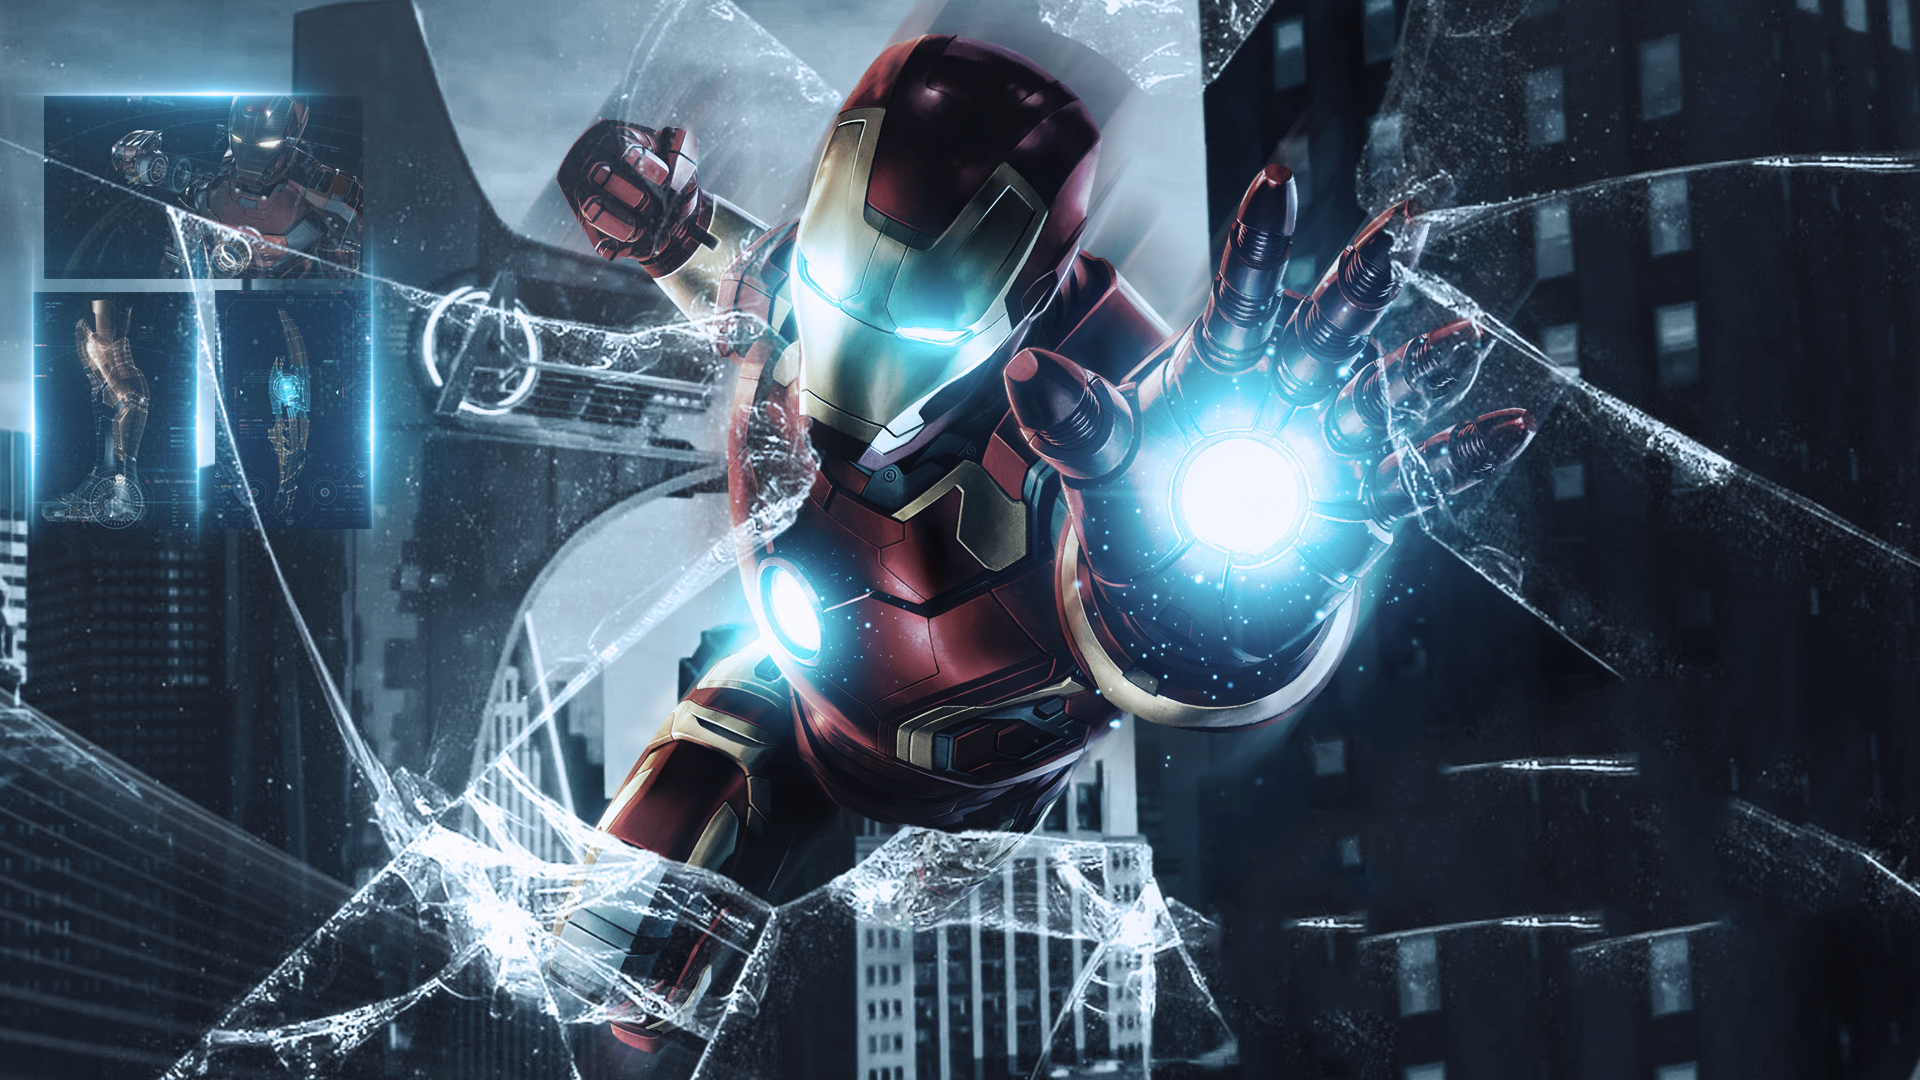 Iron Man Avengers Endgame Poster, HD Superheroes, 4k Wallpapers, Images,  Backgrounds, Photos and Pictures